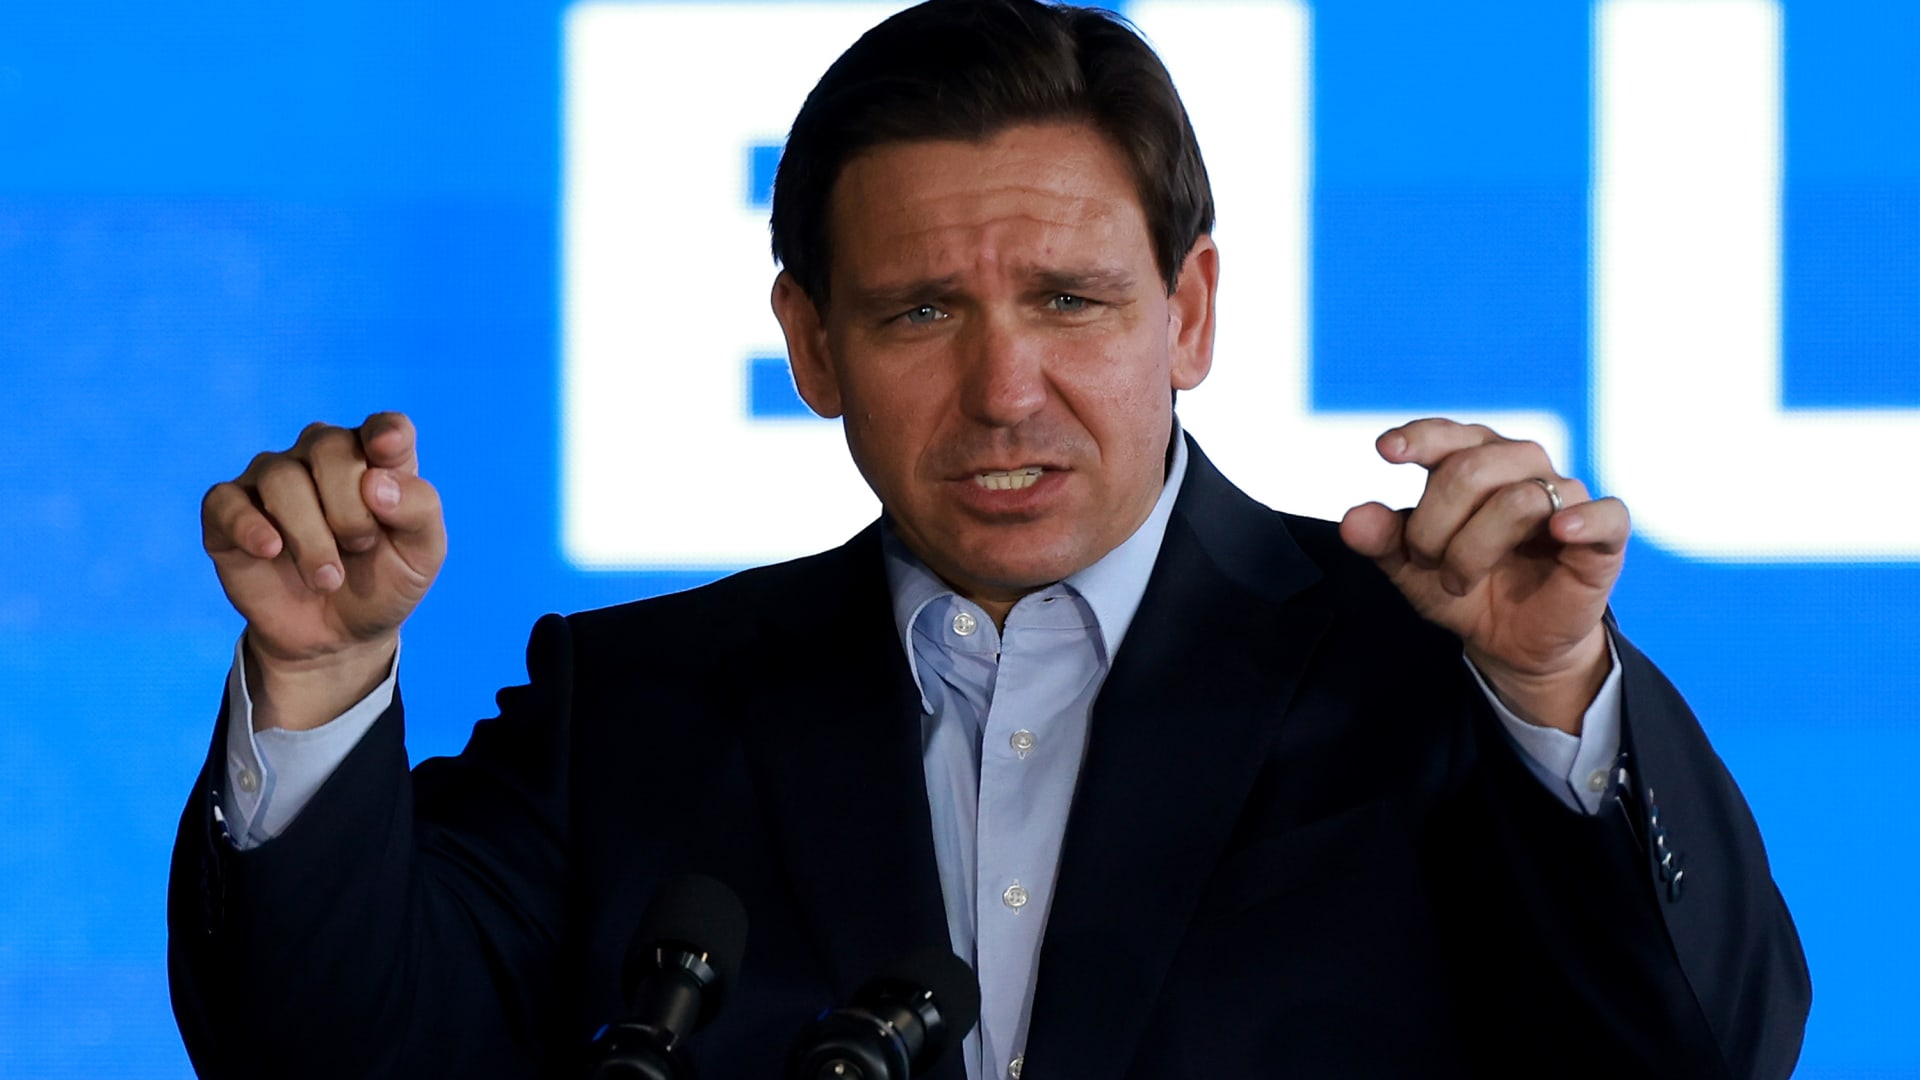 Florida Gov. Ron DeSantis speaks during an event spotlighting his newly released book, “The Courage To Be Free: Florida’s Blueprint For America’s Revival” at the Orange County Choppers Road House & Museum on March 08, 2023 in Pinellas Park, Florida. 